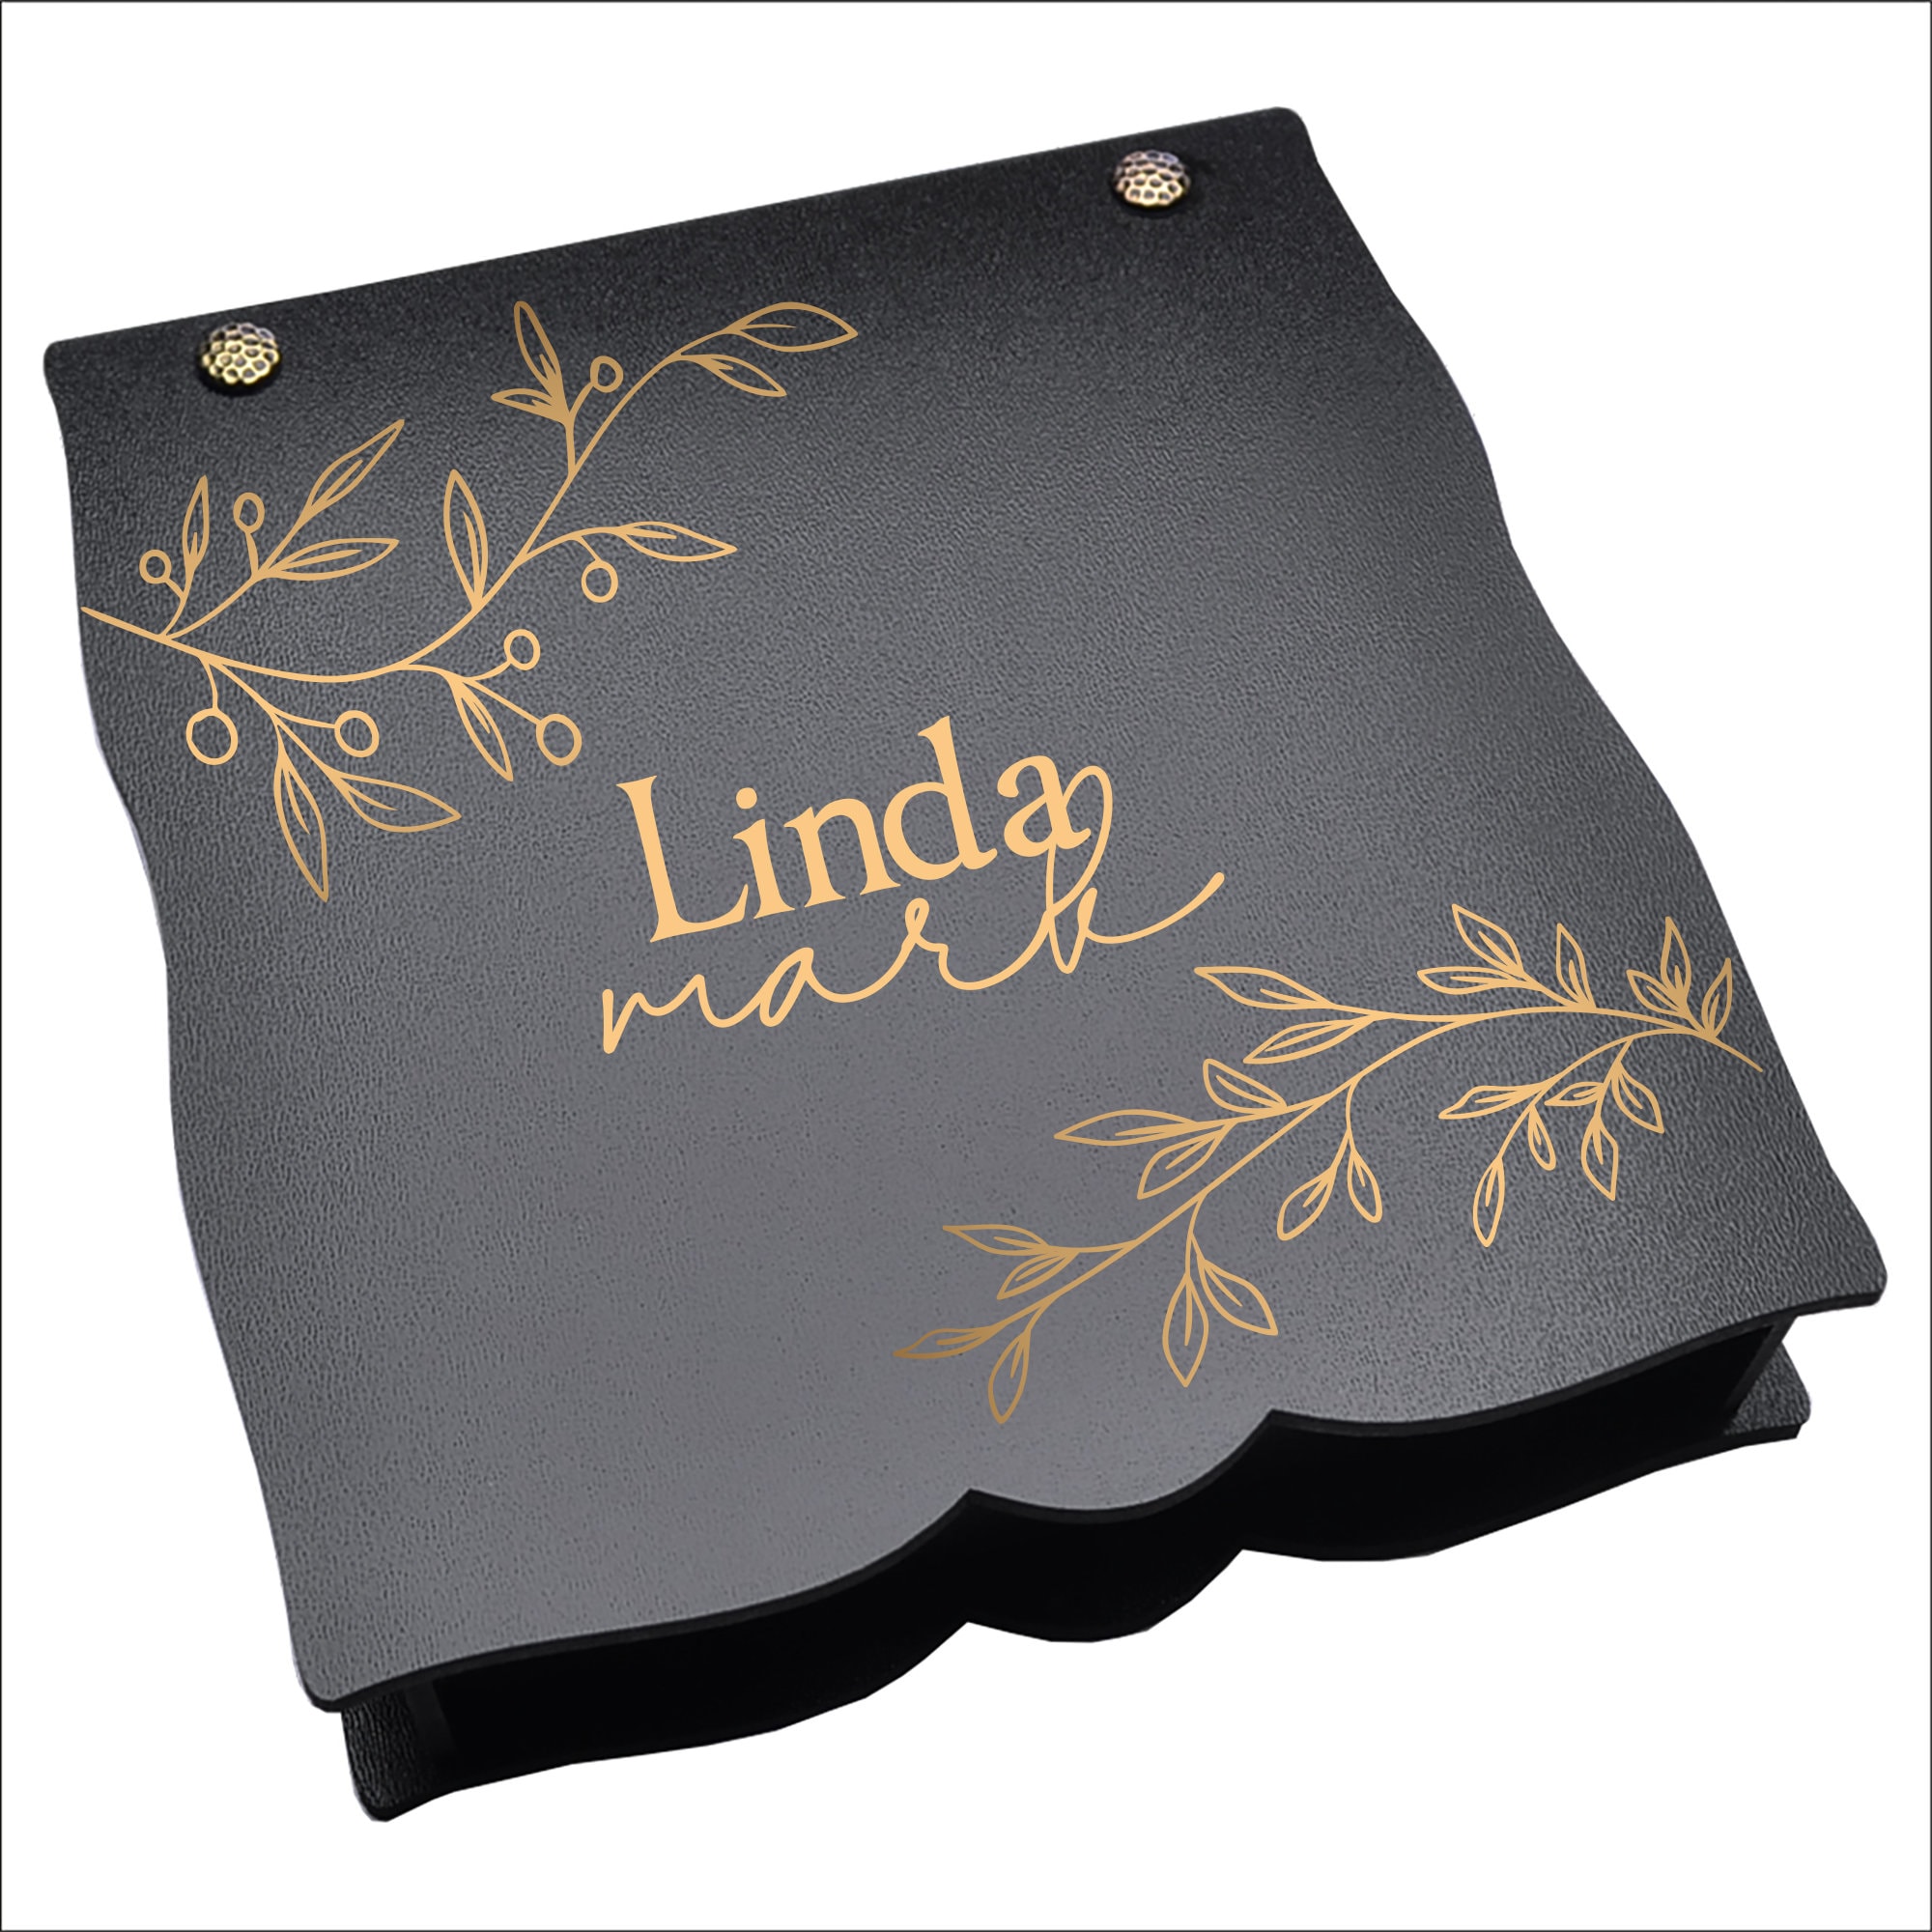 Personalized Leatherette Engraved Sketch Book with Your Name or Monogram -  Perfect Birthday or Christmas Gift for Artists (7 x 9.75)